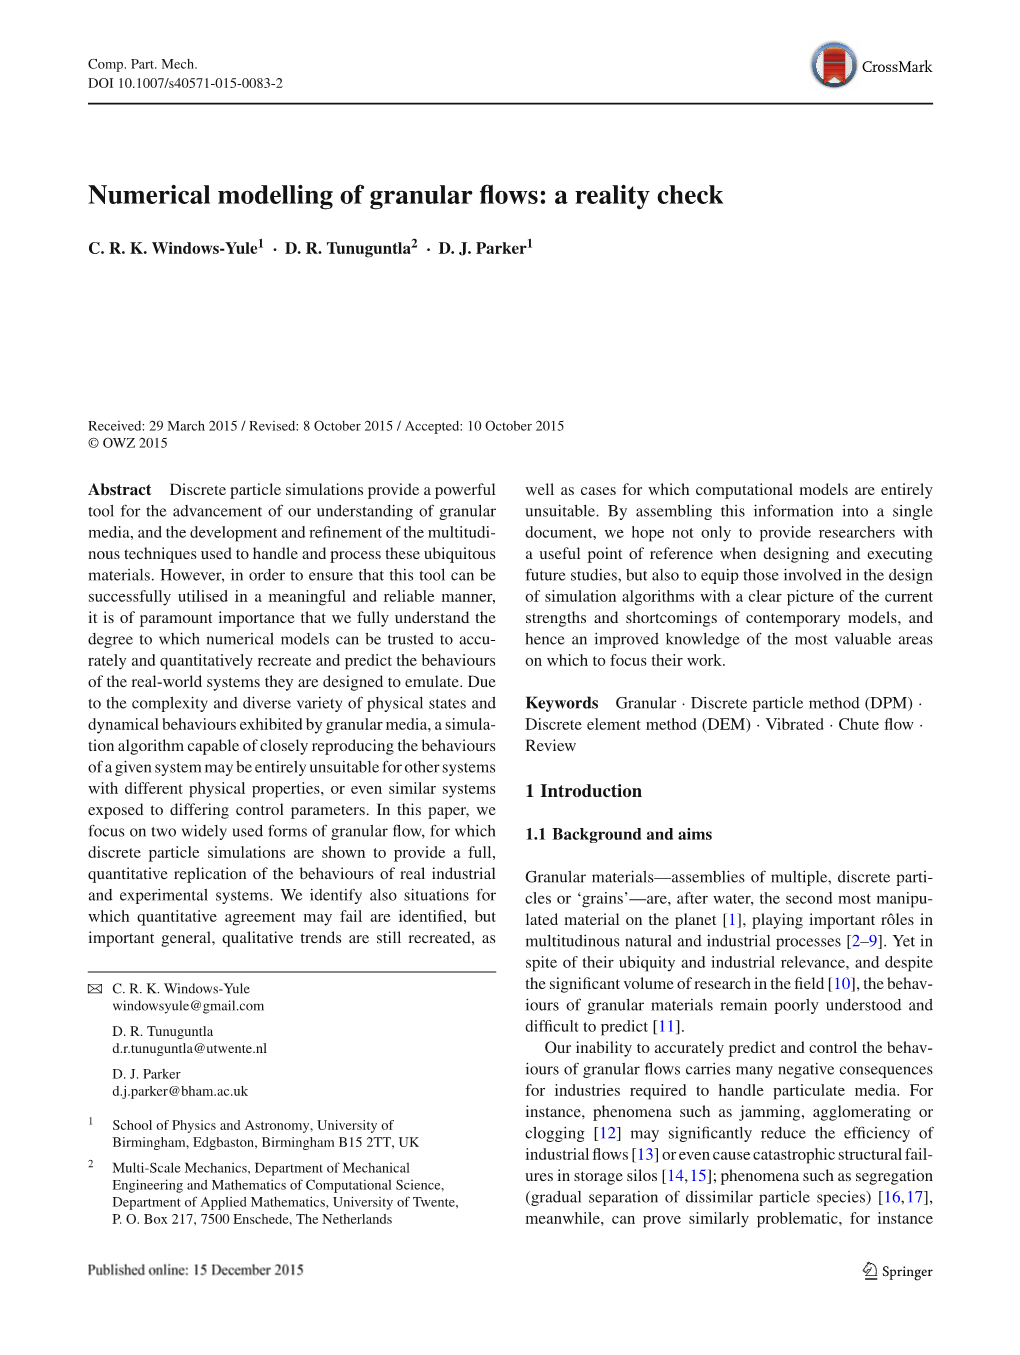 Numerical Modelling of Granular Flows: a Reality Check